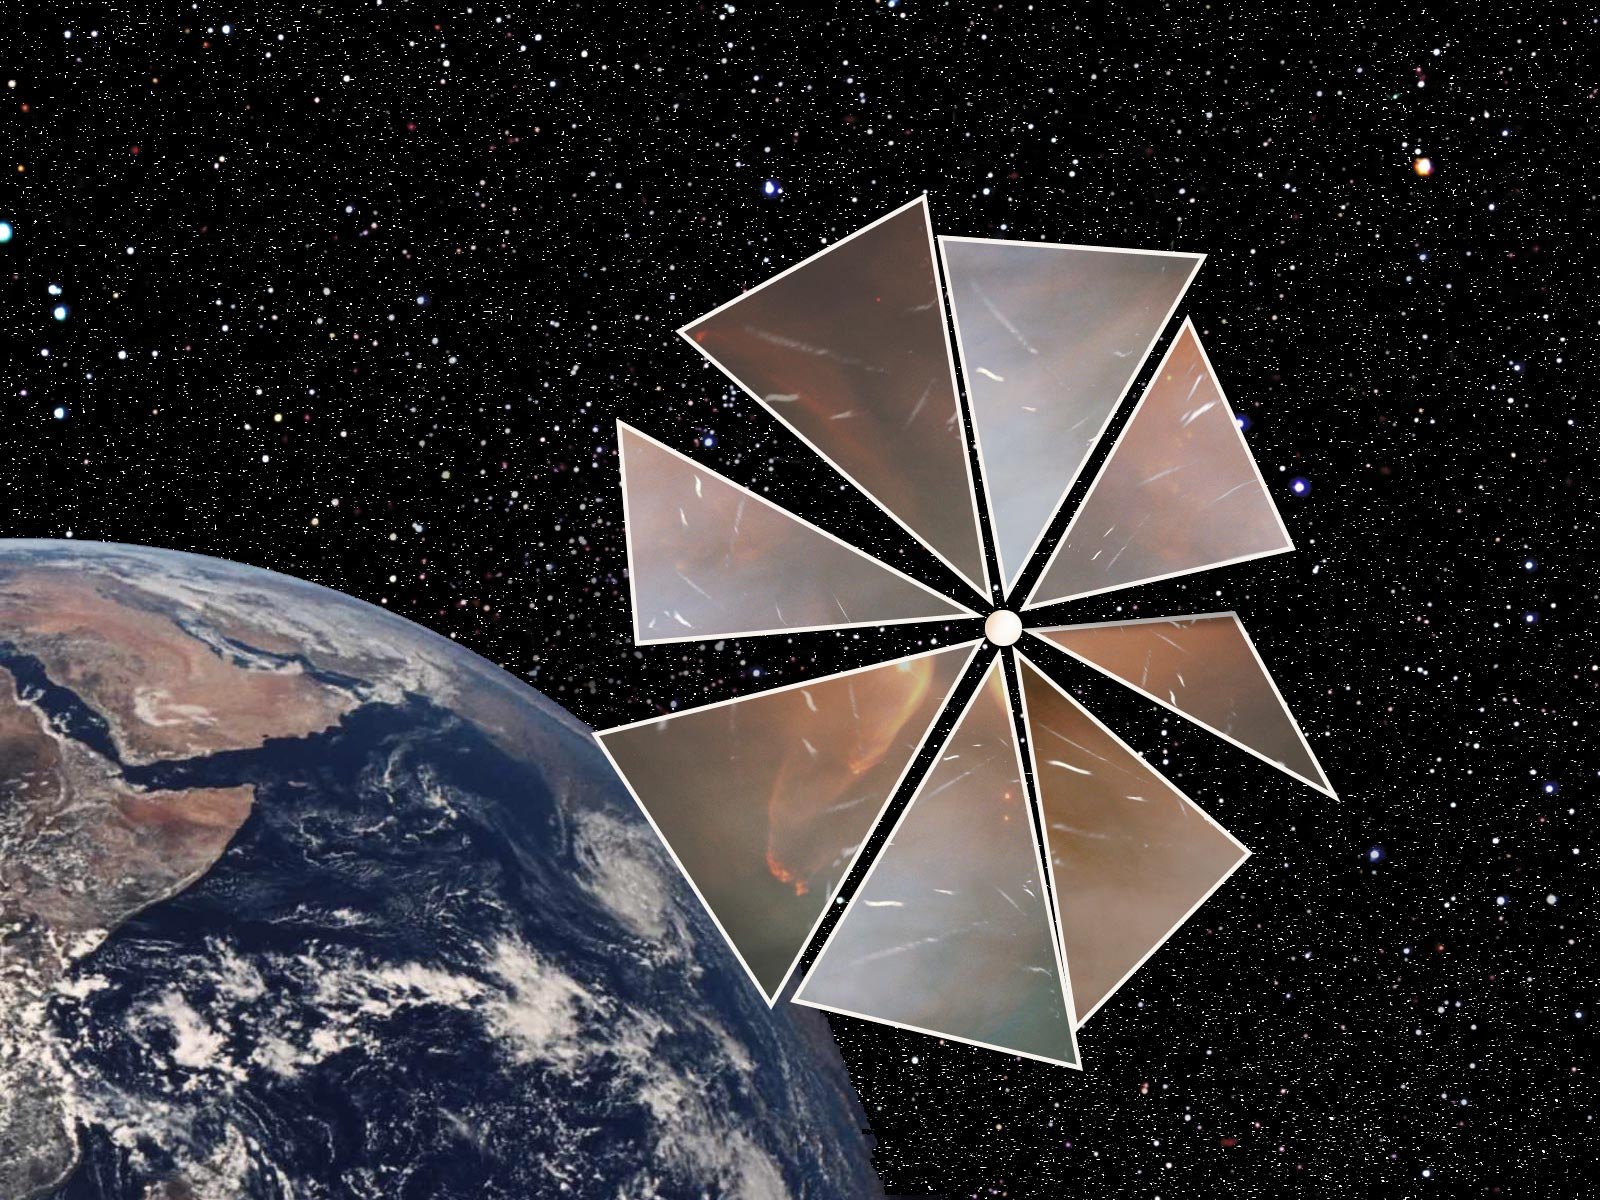 A Small Satellite With a Solar Sail Could Catch up With an Interstellar Object